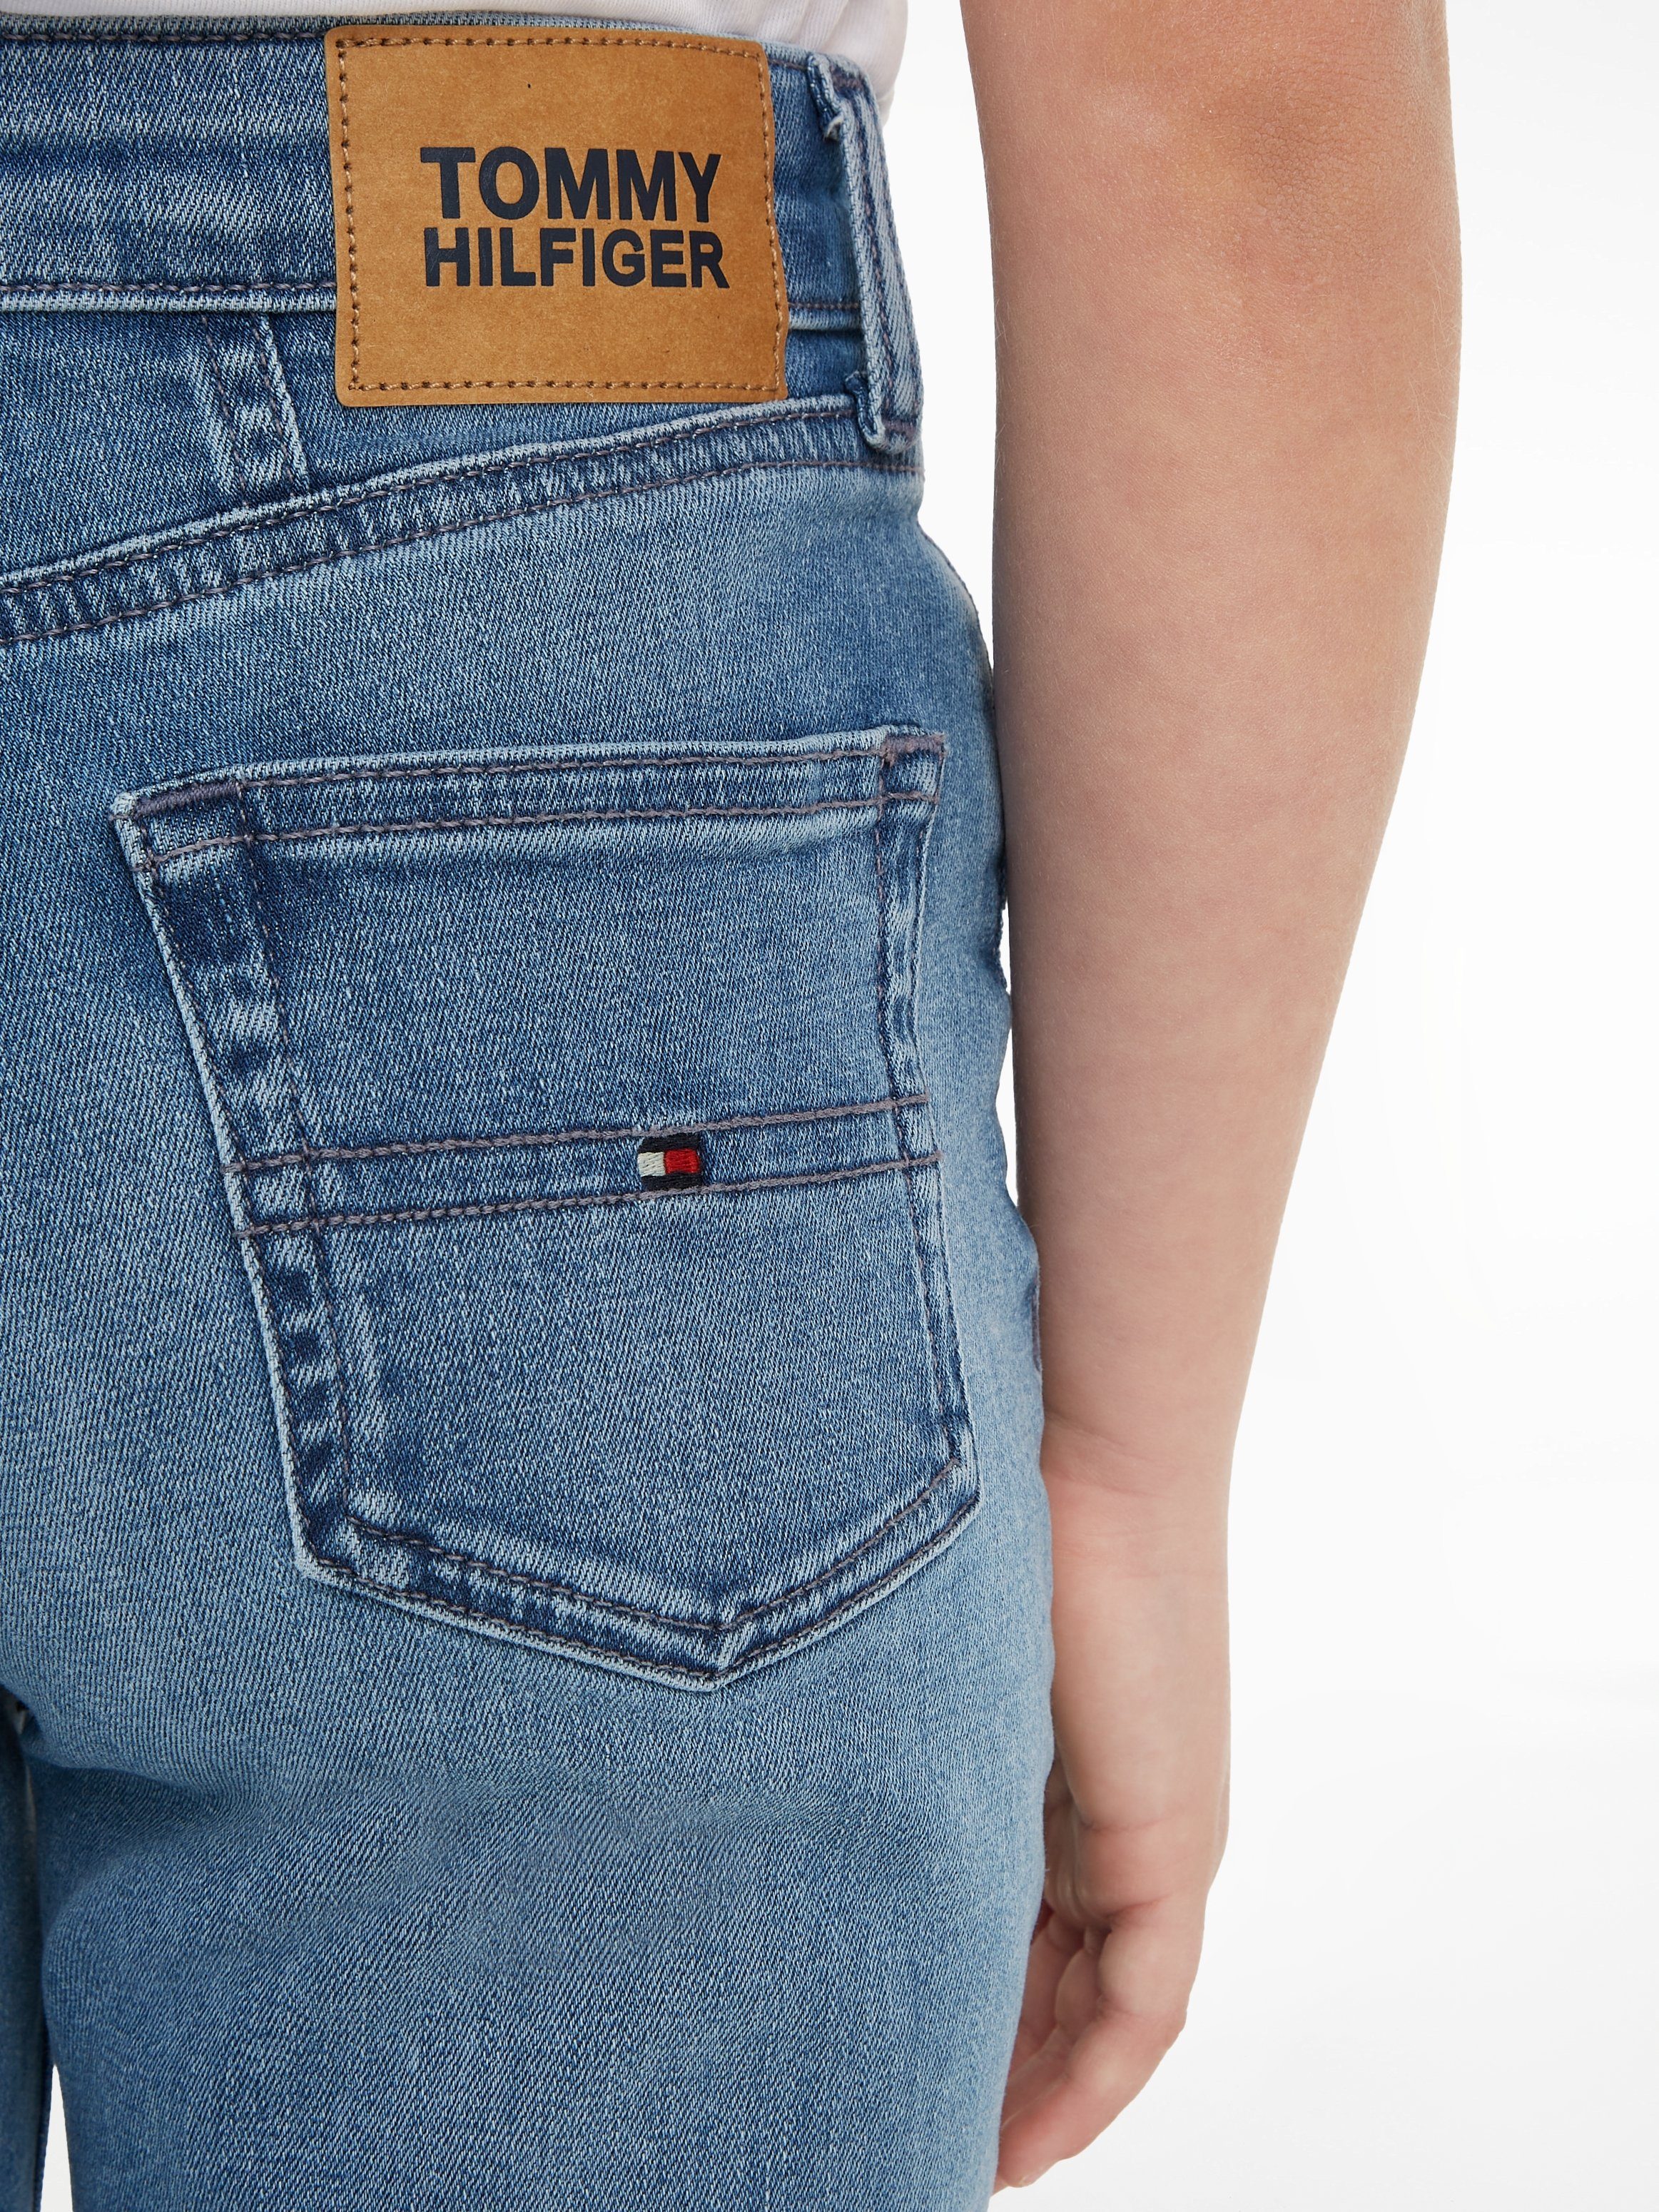 Tommy Hilfiger Tapered jeans HR TAPERED in 7 8 lengte